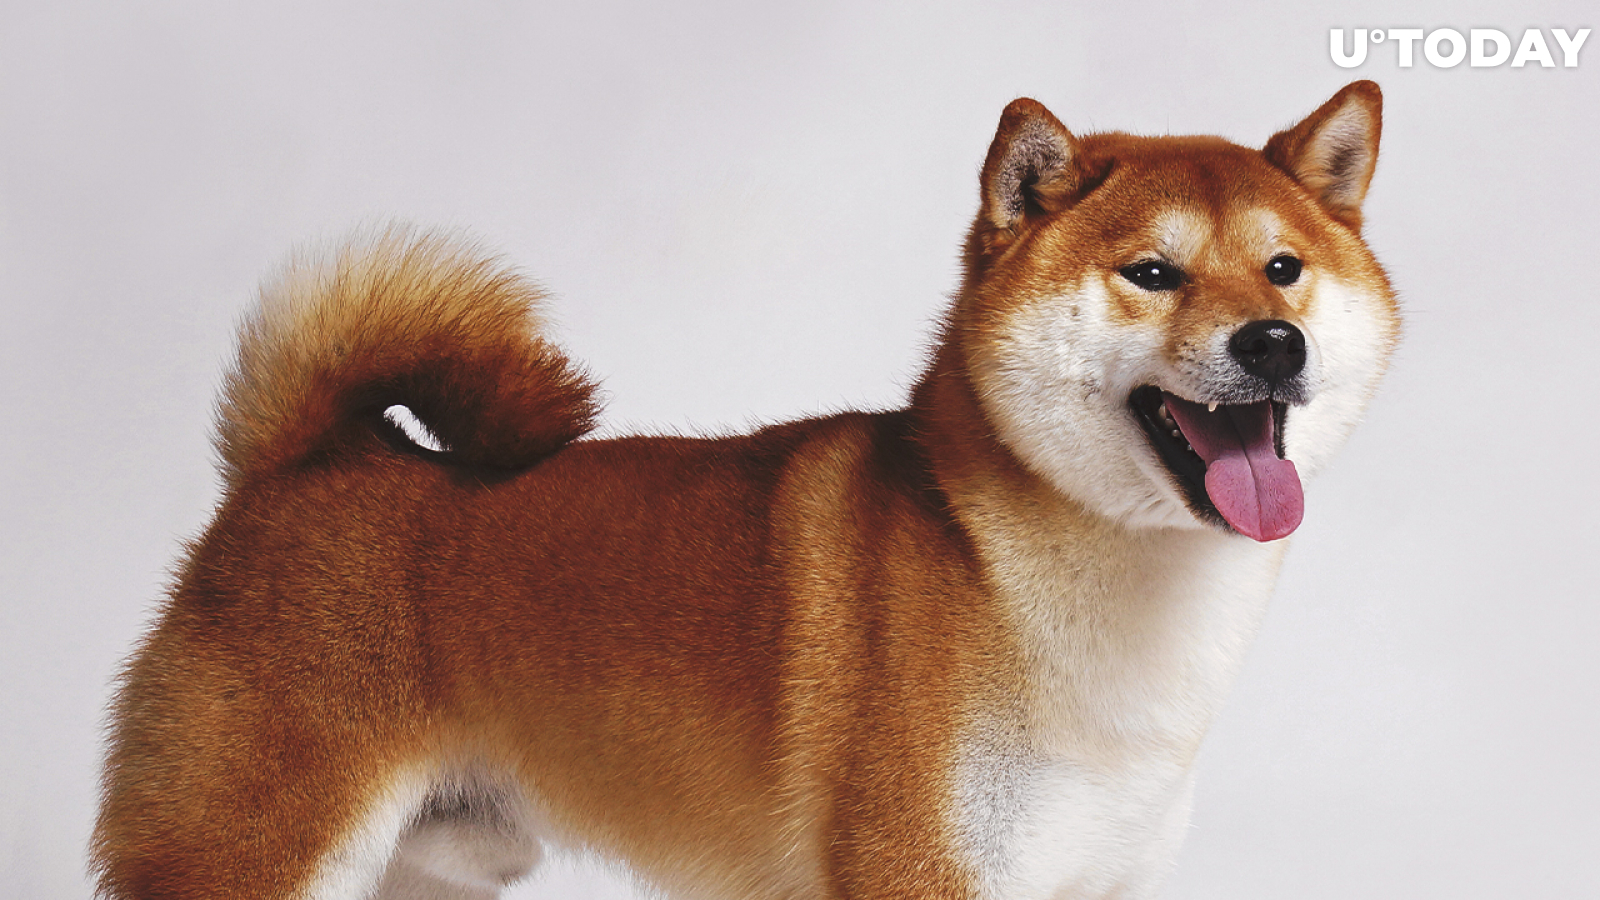 Another 50 Billion SHIB Grabbed by Top ETH Whale, Shiba Inu Ranks Third Largest Held: Details